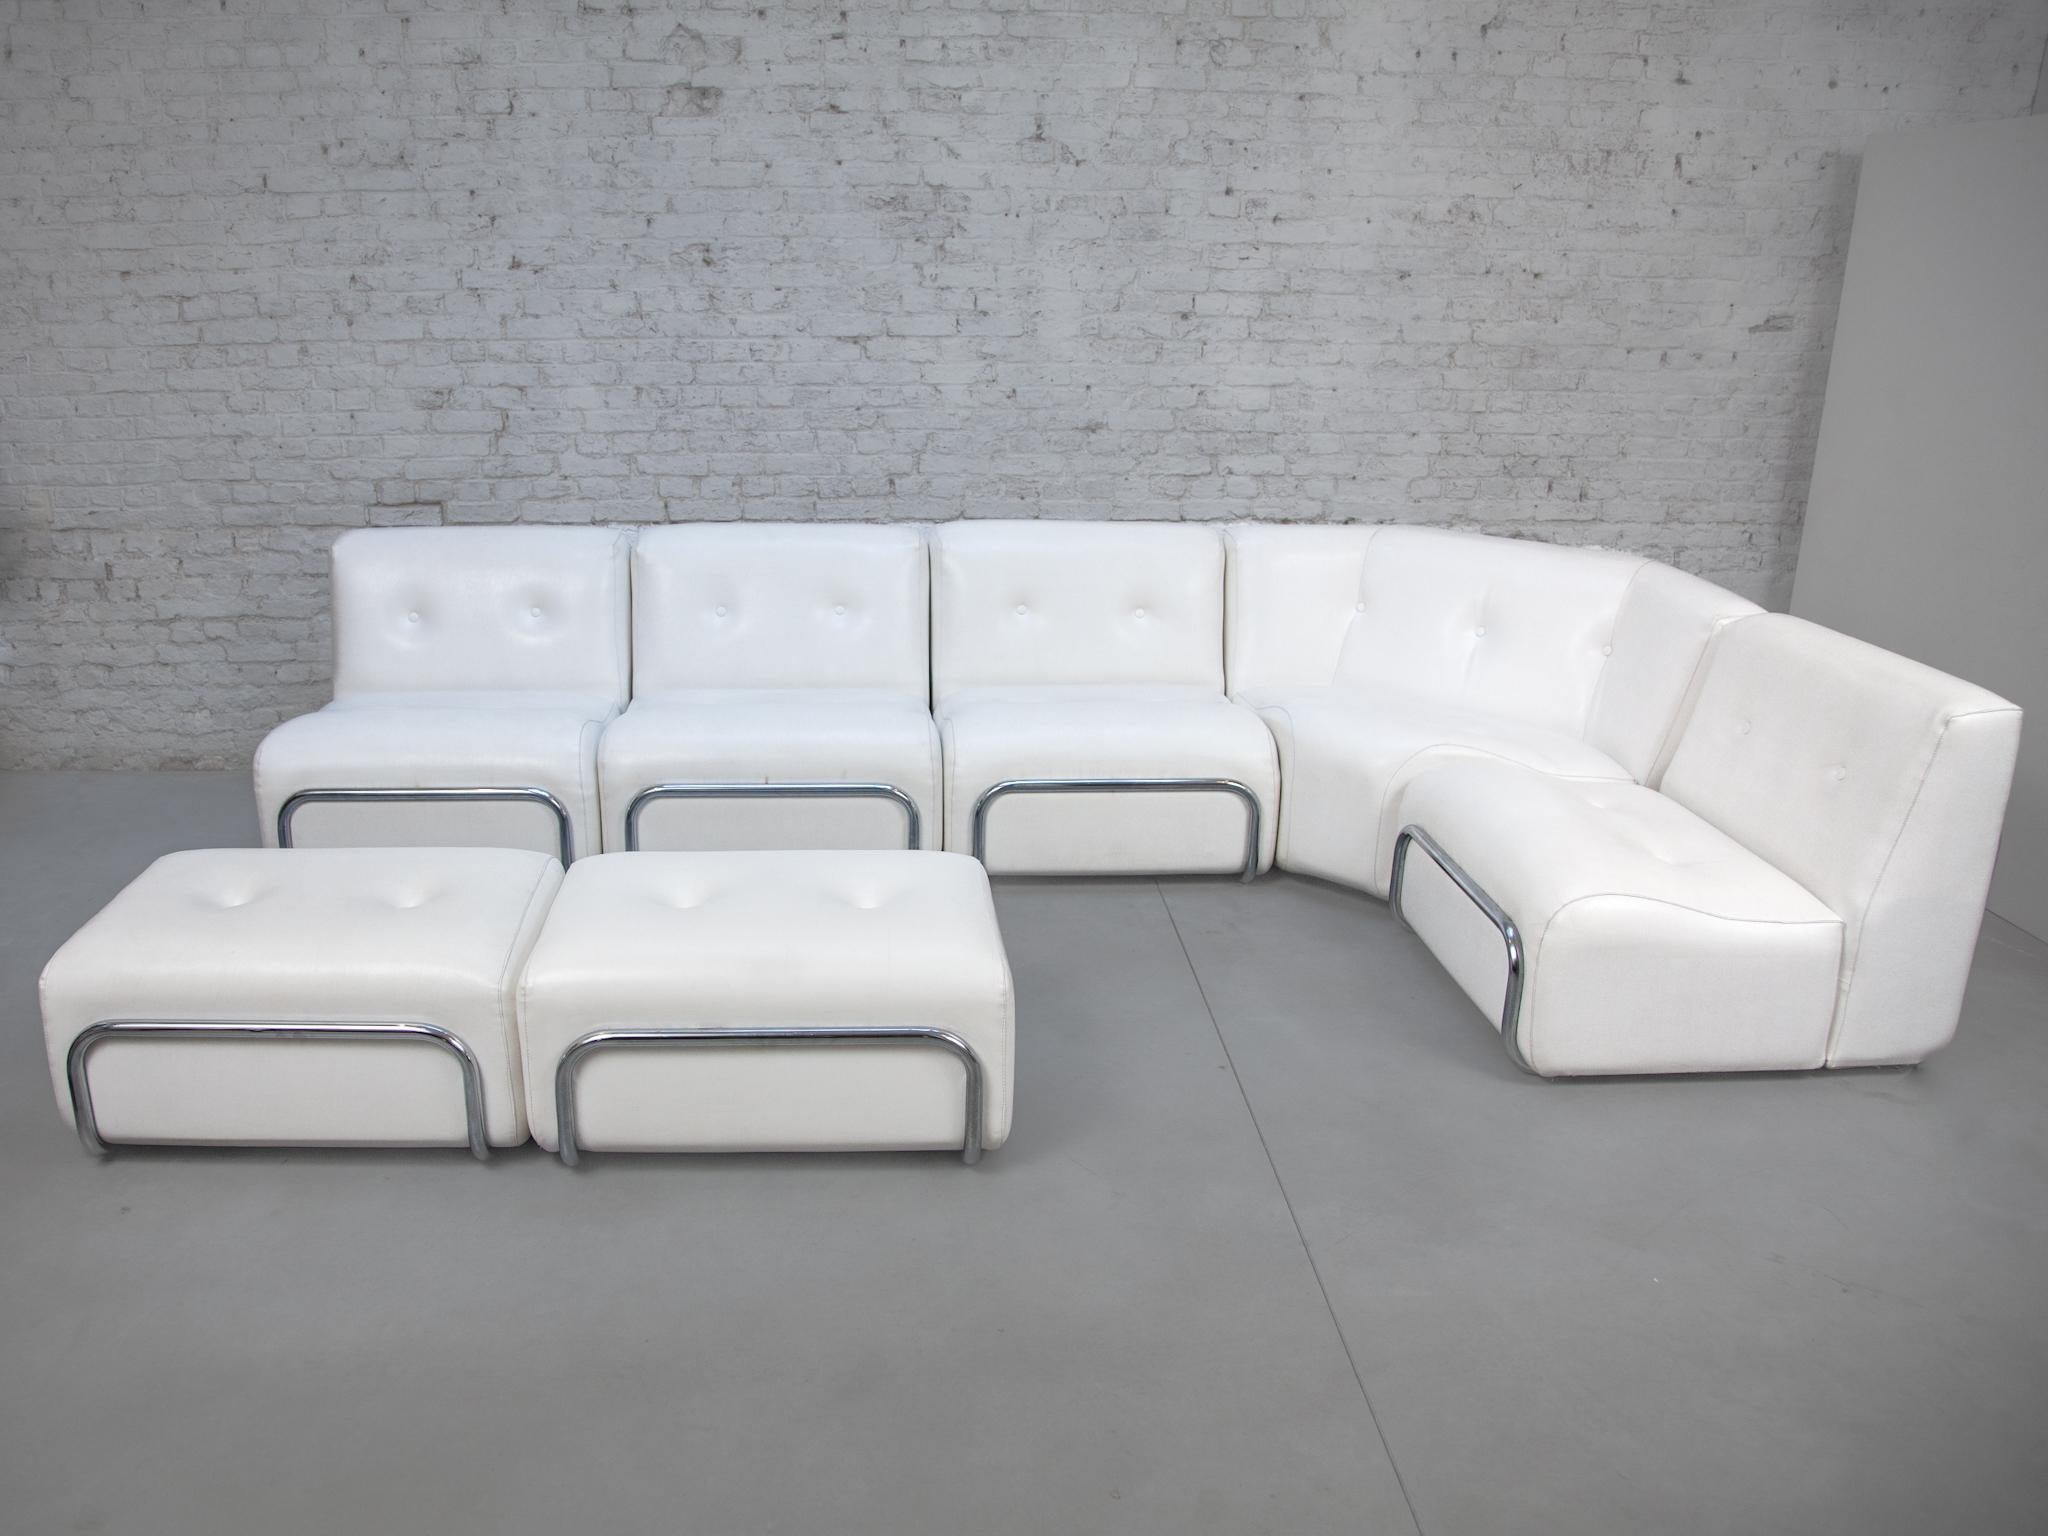 A living-room set of Adriano Piazzesi, Italian 1960's. Beautiful white tufted faux leather lounge chairs, corners and footstools, with chrome-plated tubular steel curved supports in front and back sides, the front and back tubes showcasing the seats